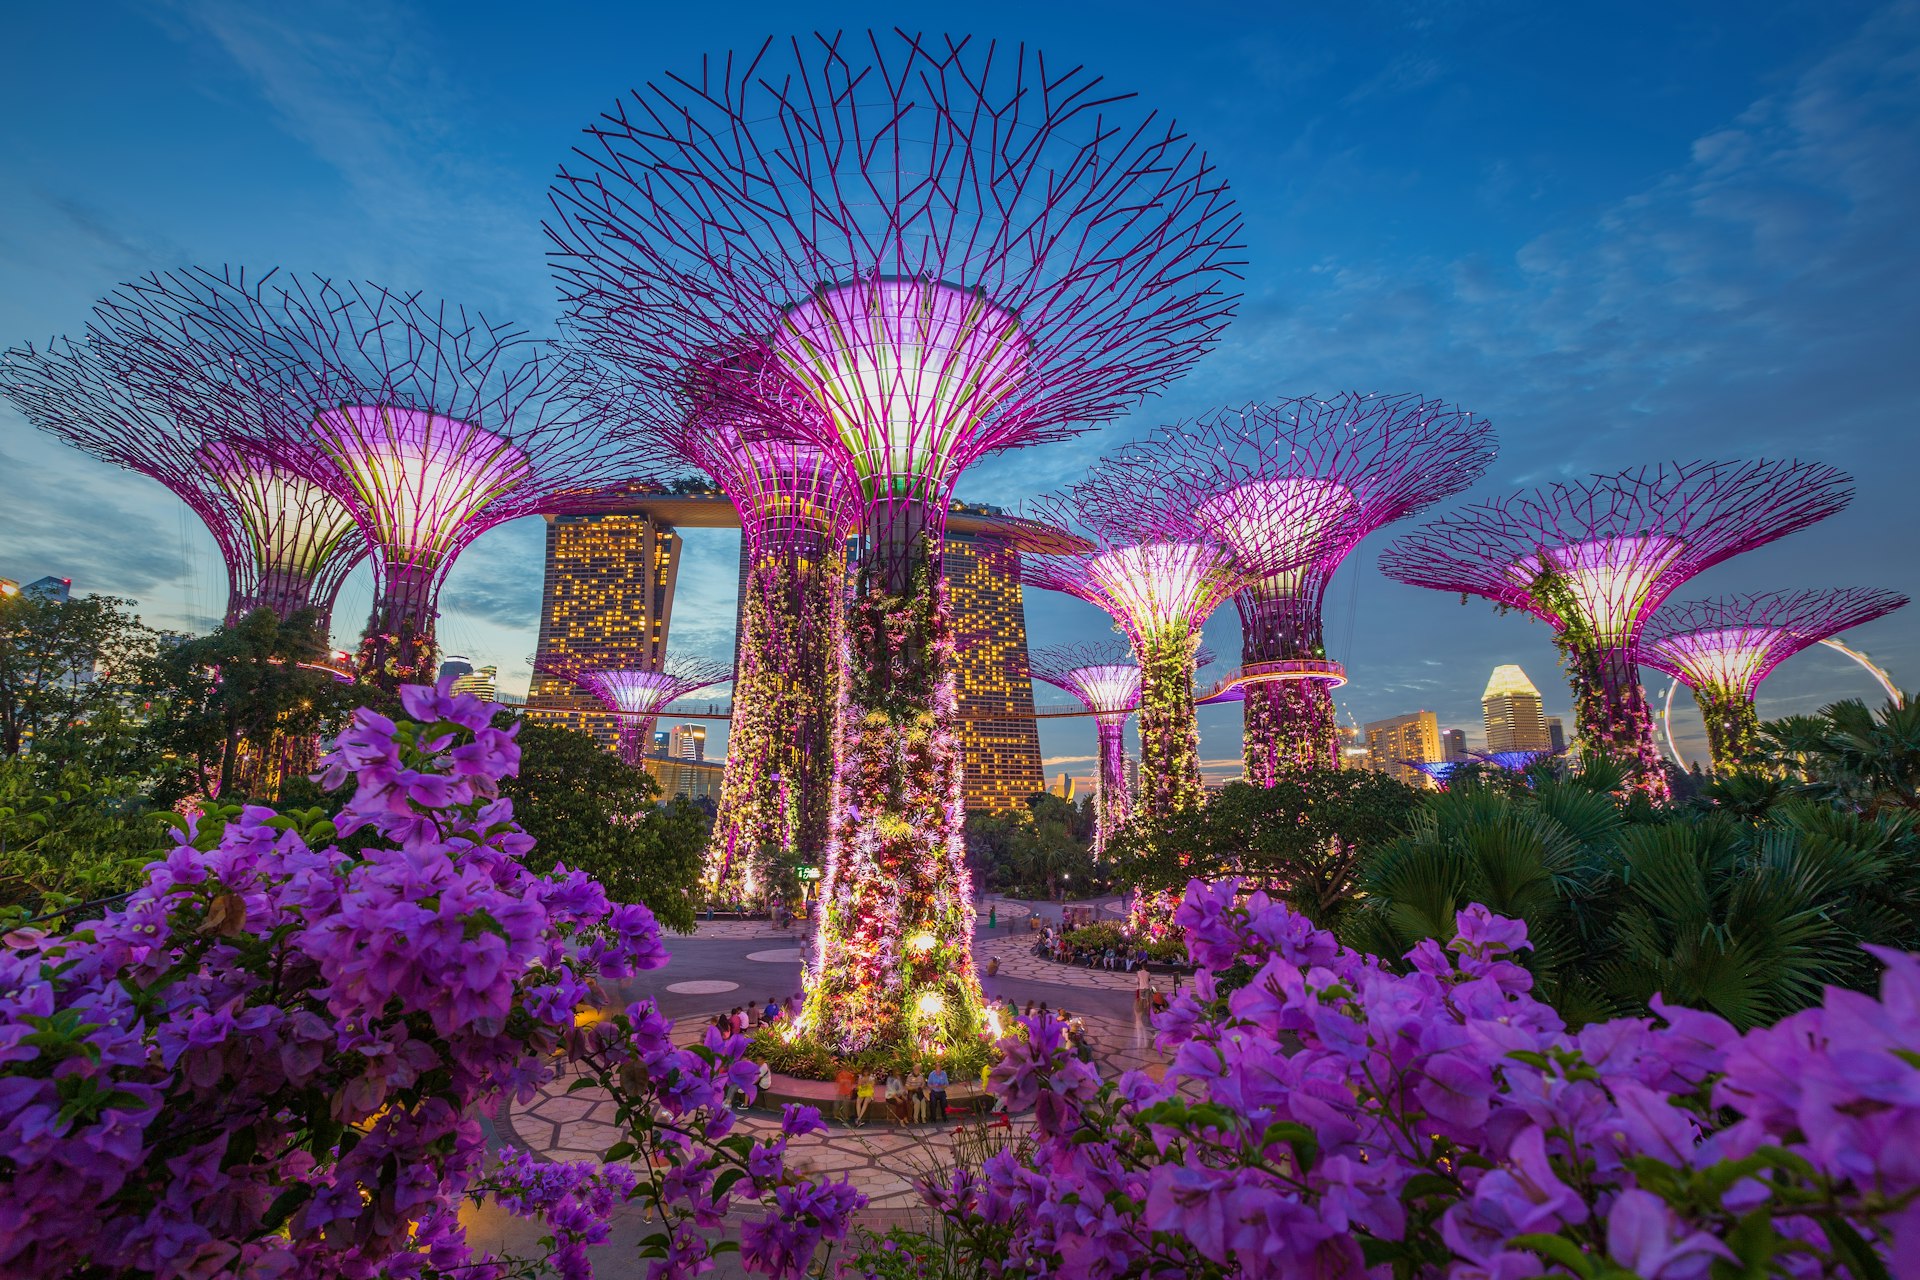 Singapore's Gardens by the Bay 